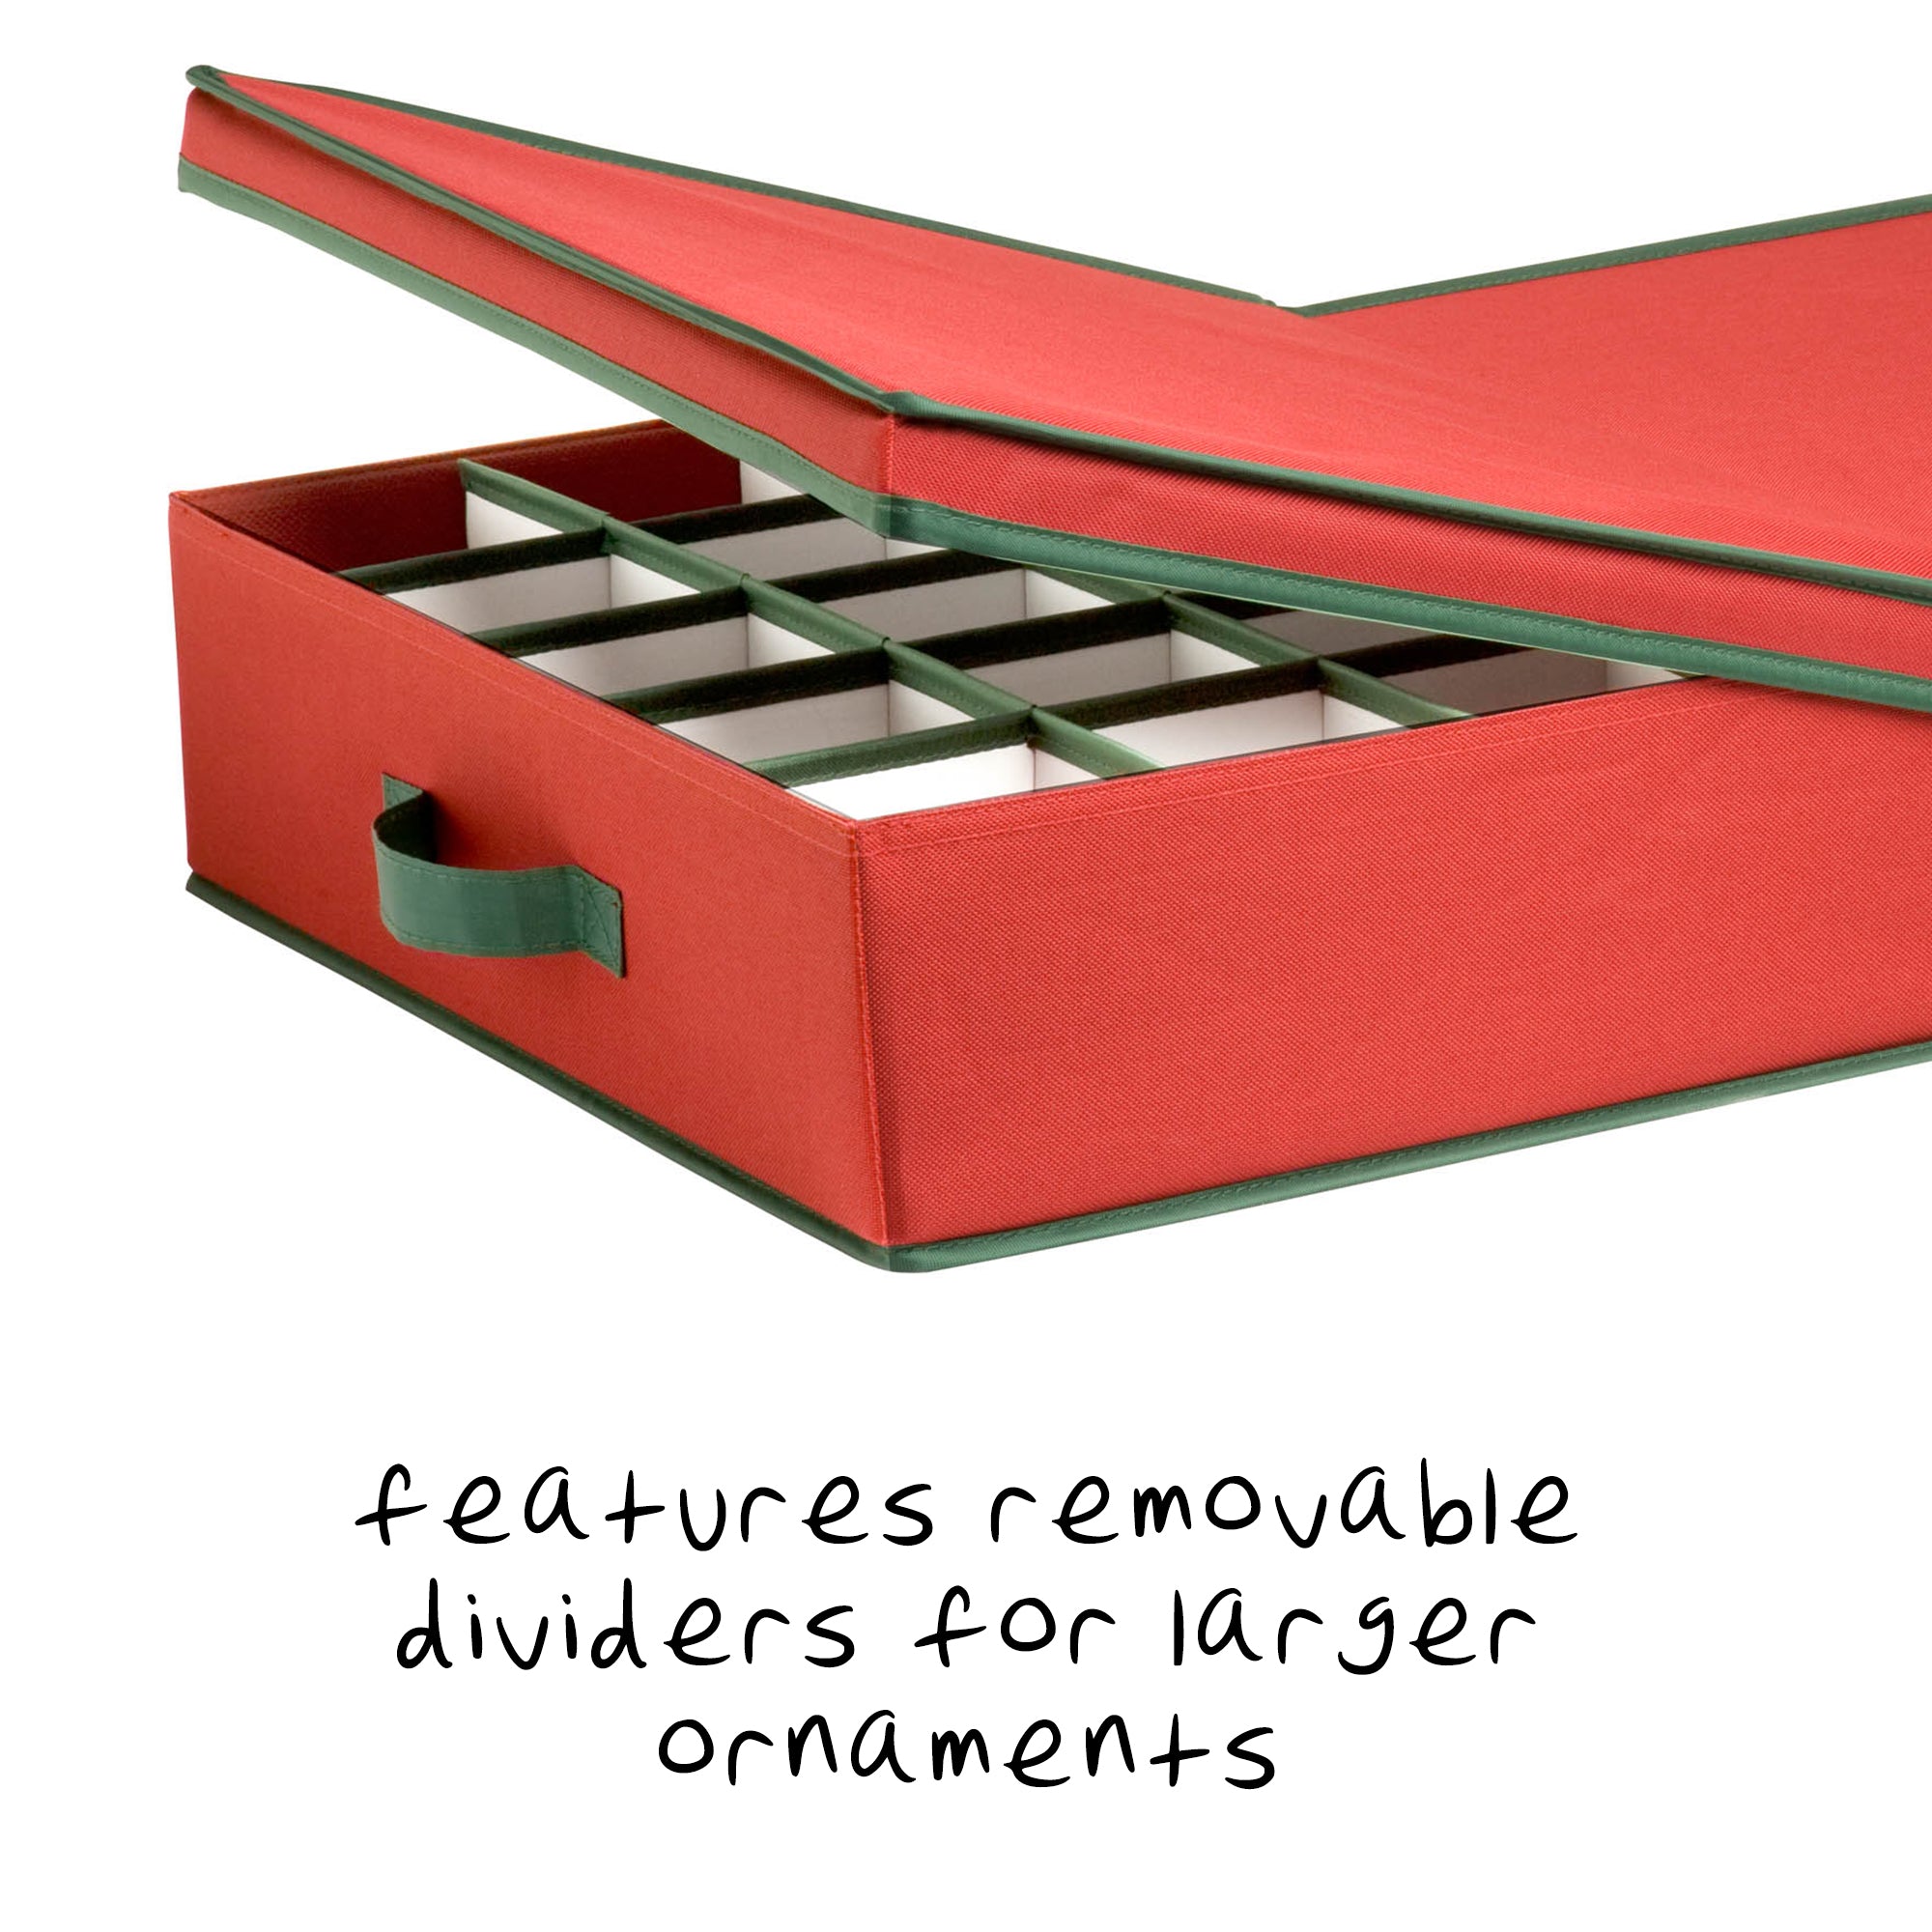 [Red Christmas Ornament Storage Box With Dividers] - (Holds 48 Ornaments up  to 3 Inches in Diameter) | Acid-Free Removable Trays with Separators 